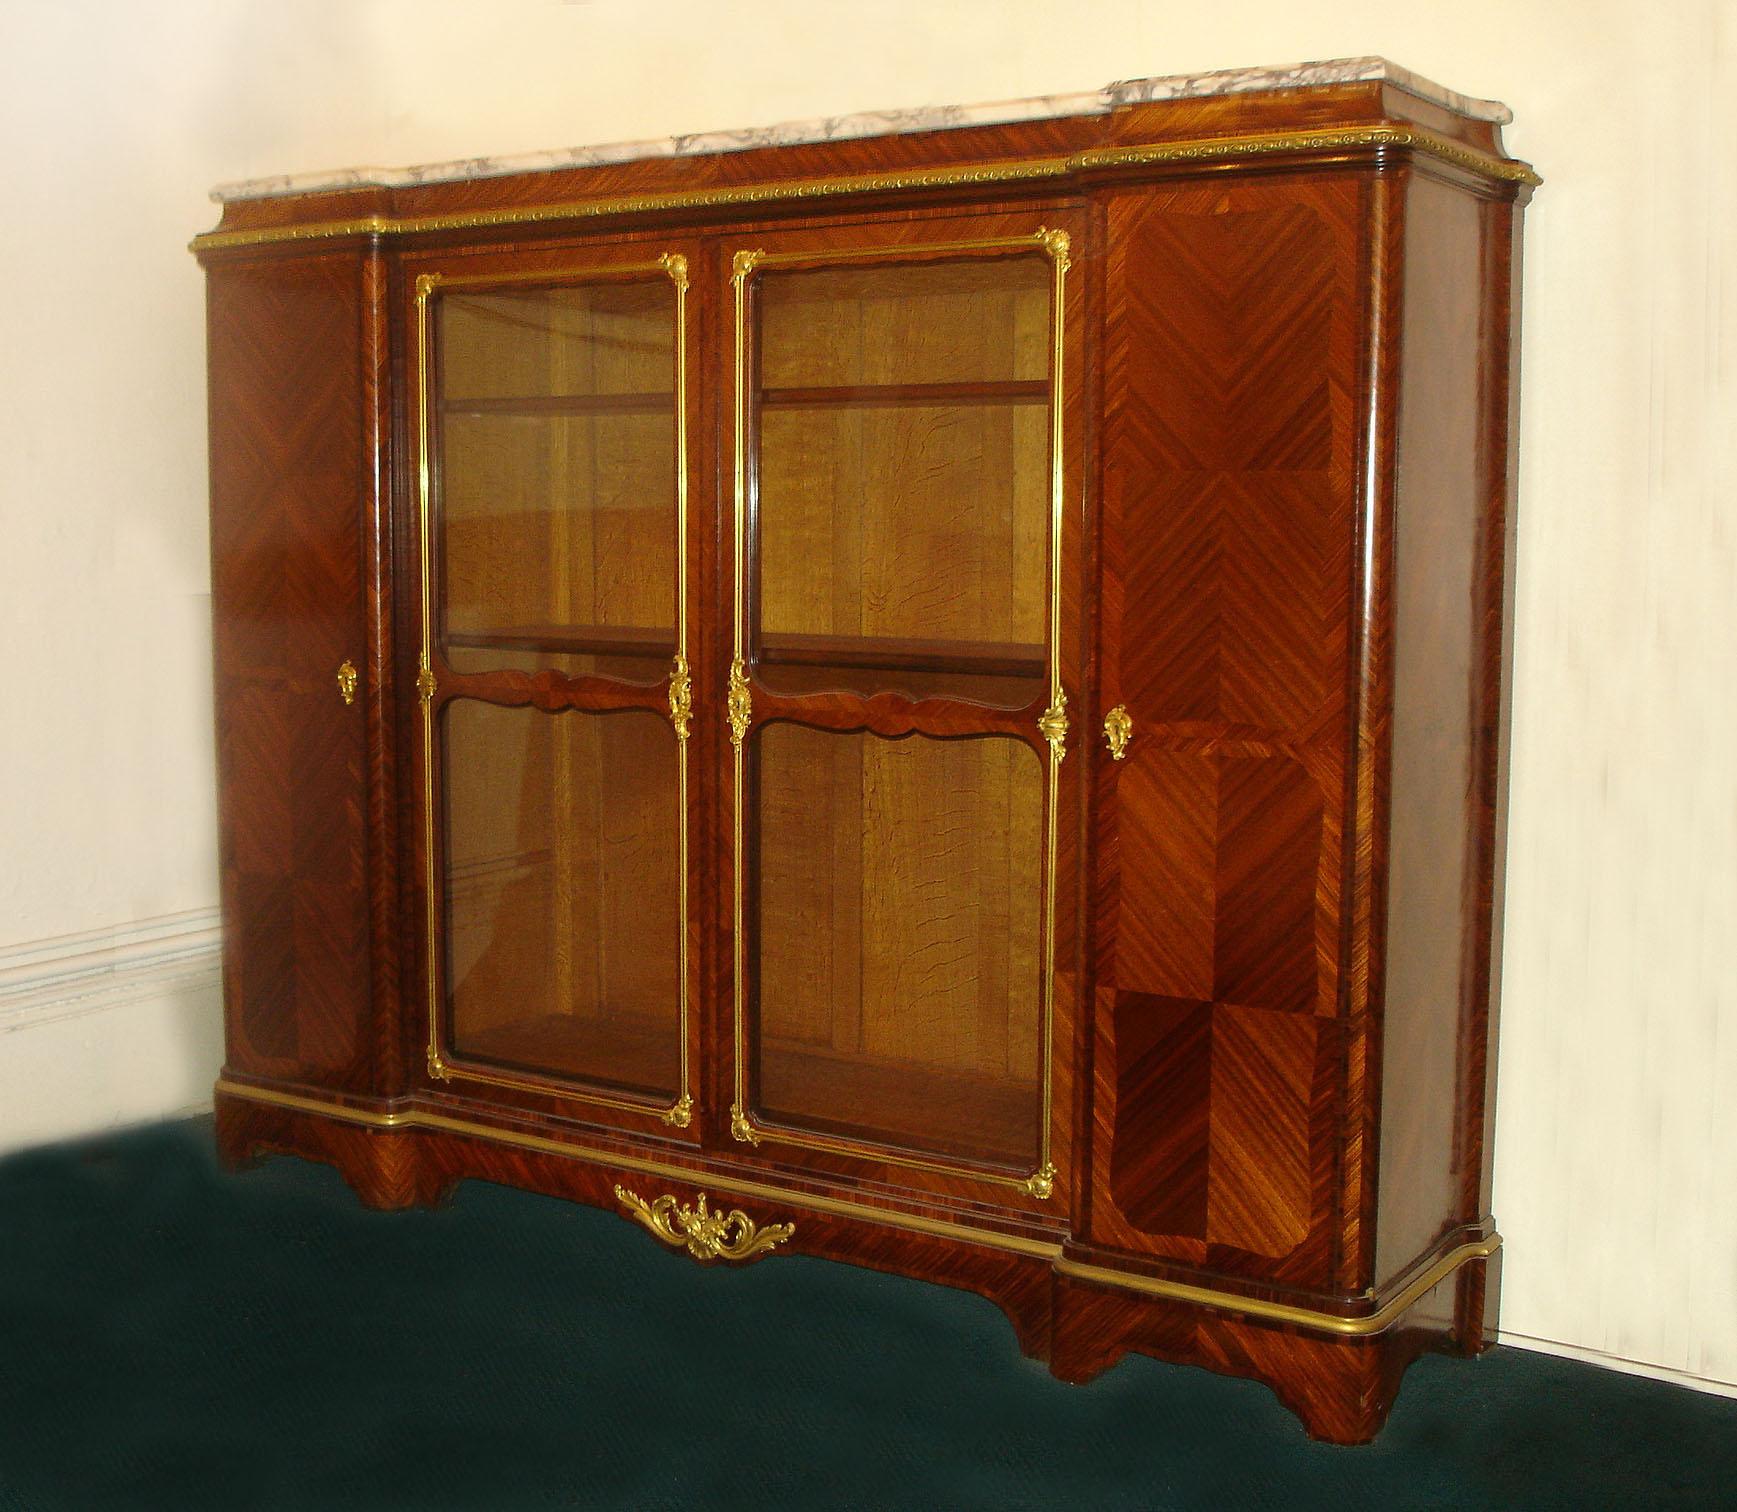 A Fine and Grand Late 19th Century Transitional Style Gilt Bronze Mounted Vitrine/Bookcase By Paul Sormani

Paul Sormani

A long marble top above a bronze frieze with two glass center doors and two side quarter veneered parquetry doors.

The inside